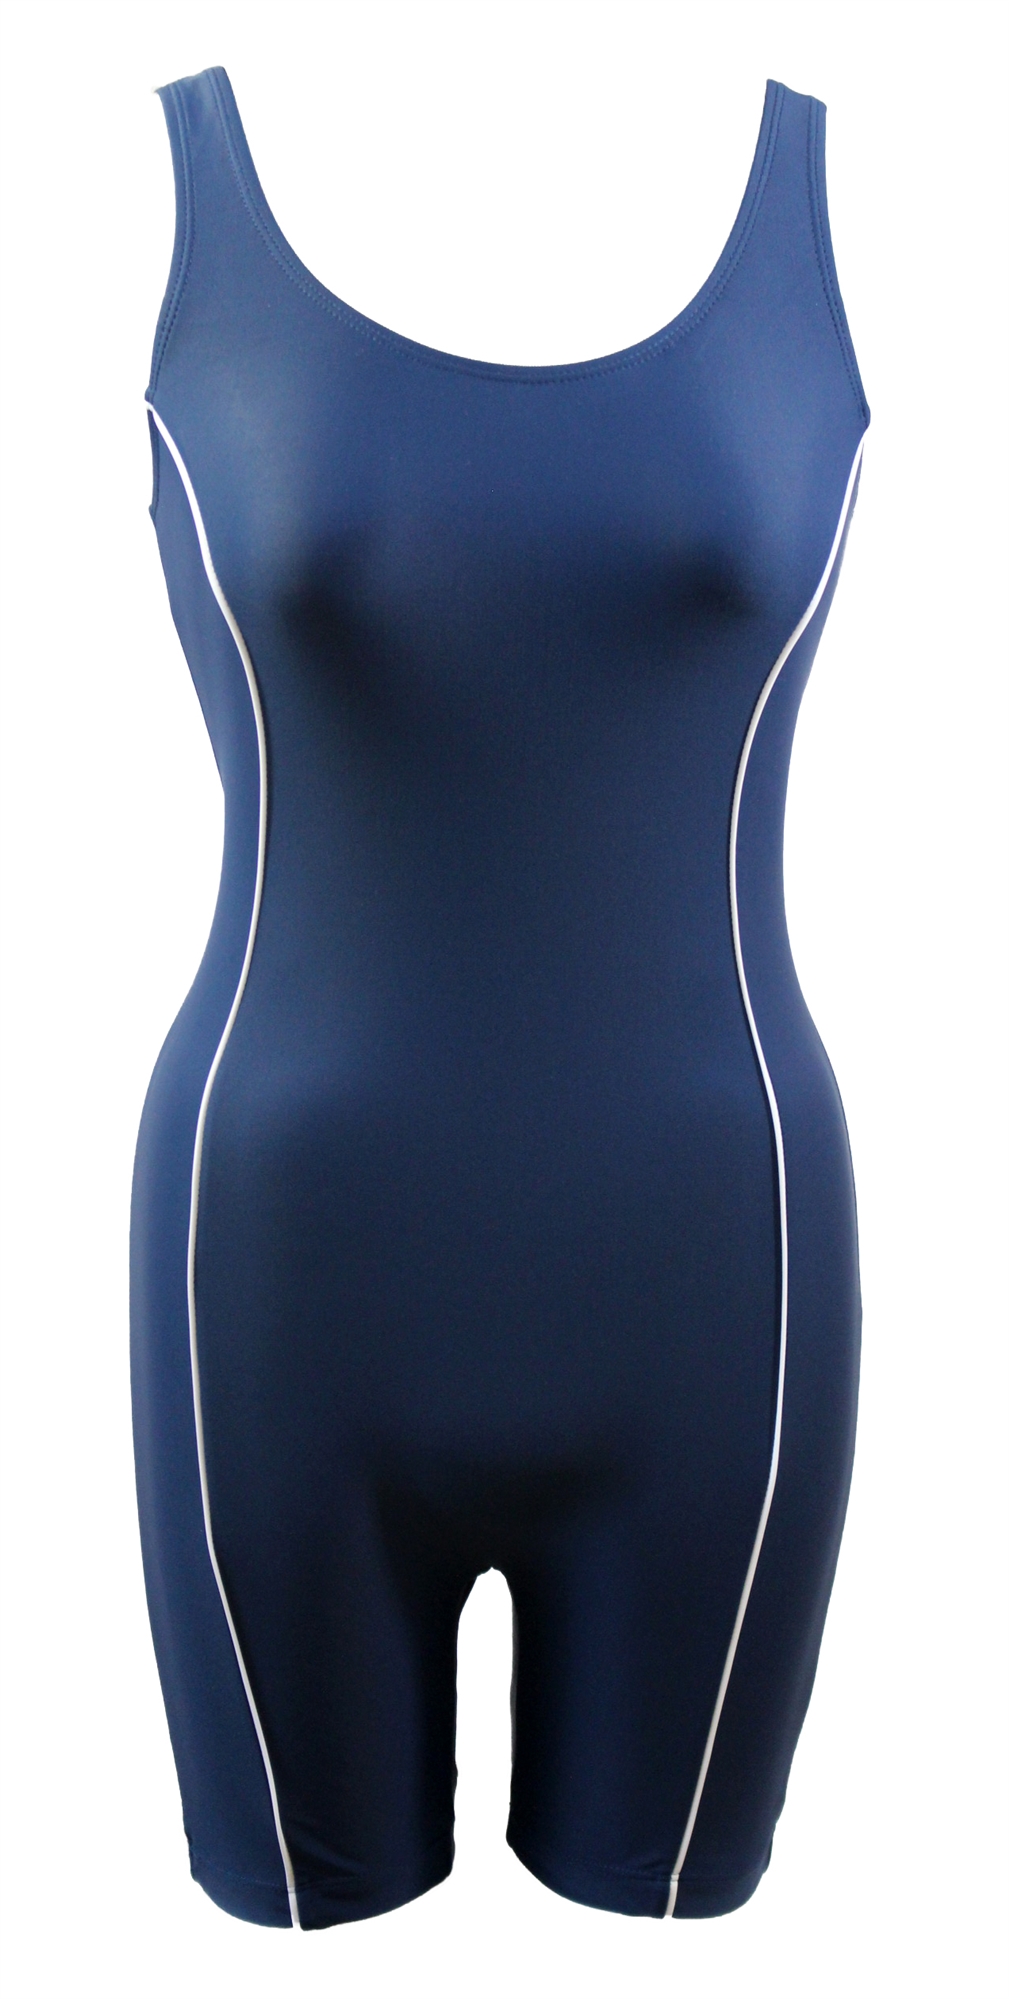 Adoretex Women's Xtra Life Lycra Unitard Swimsuit in Navy, Size X-Small - image 1 of 5